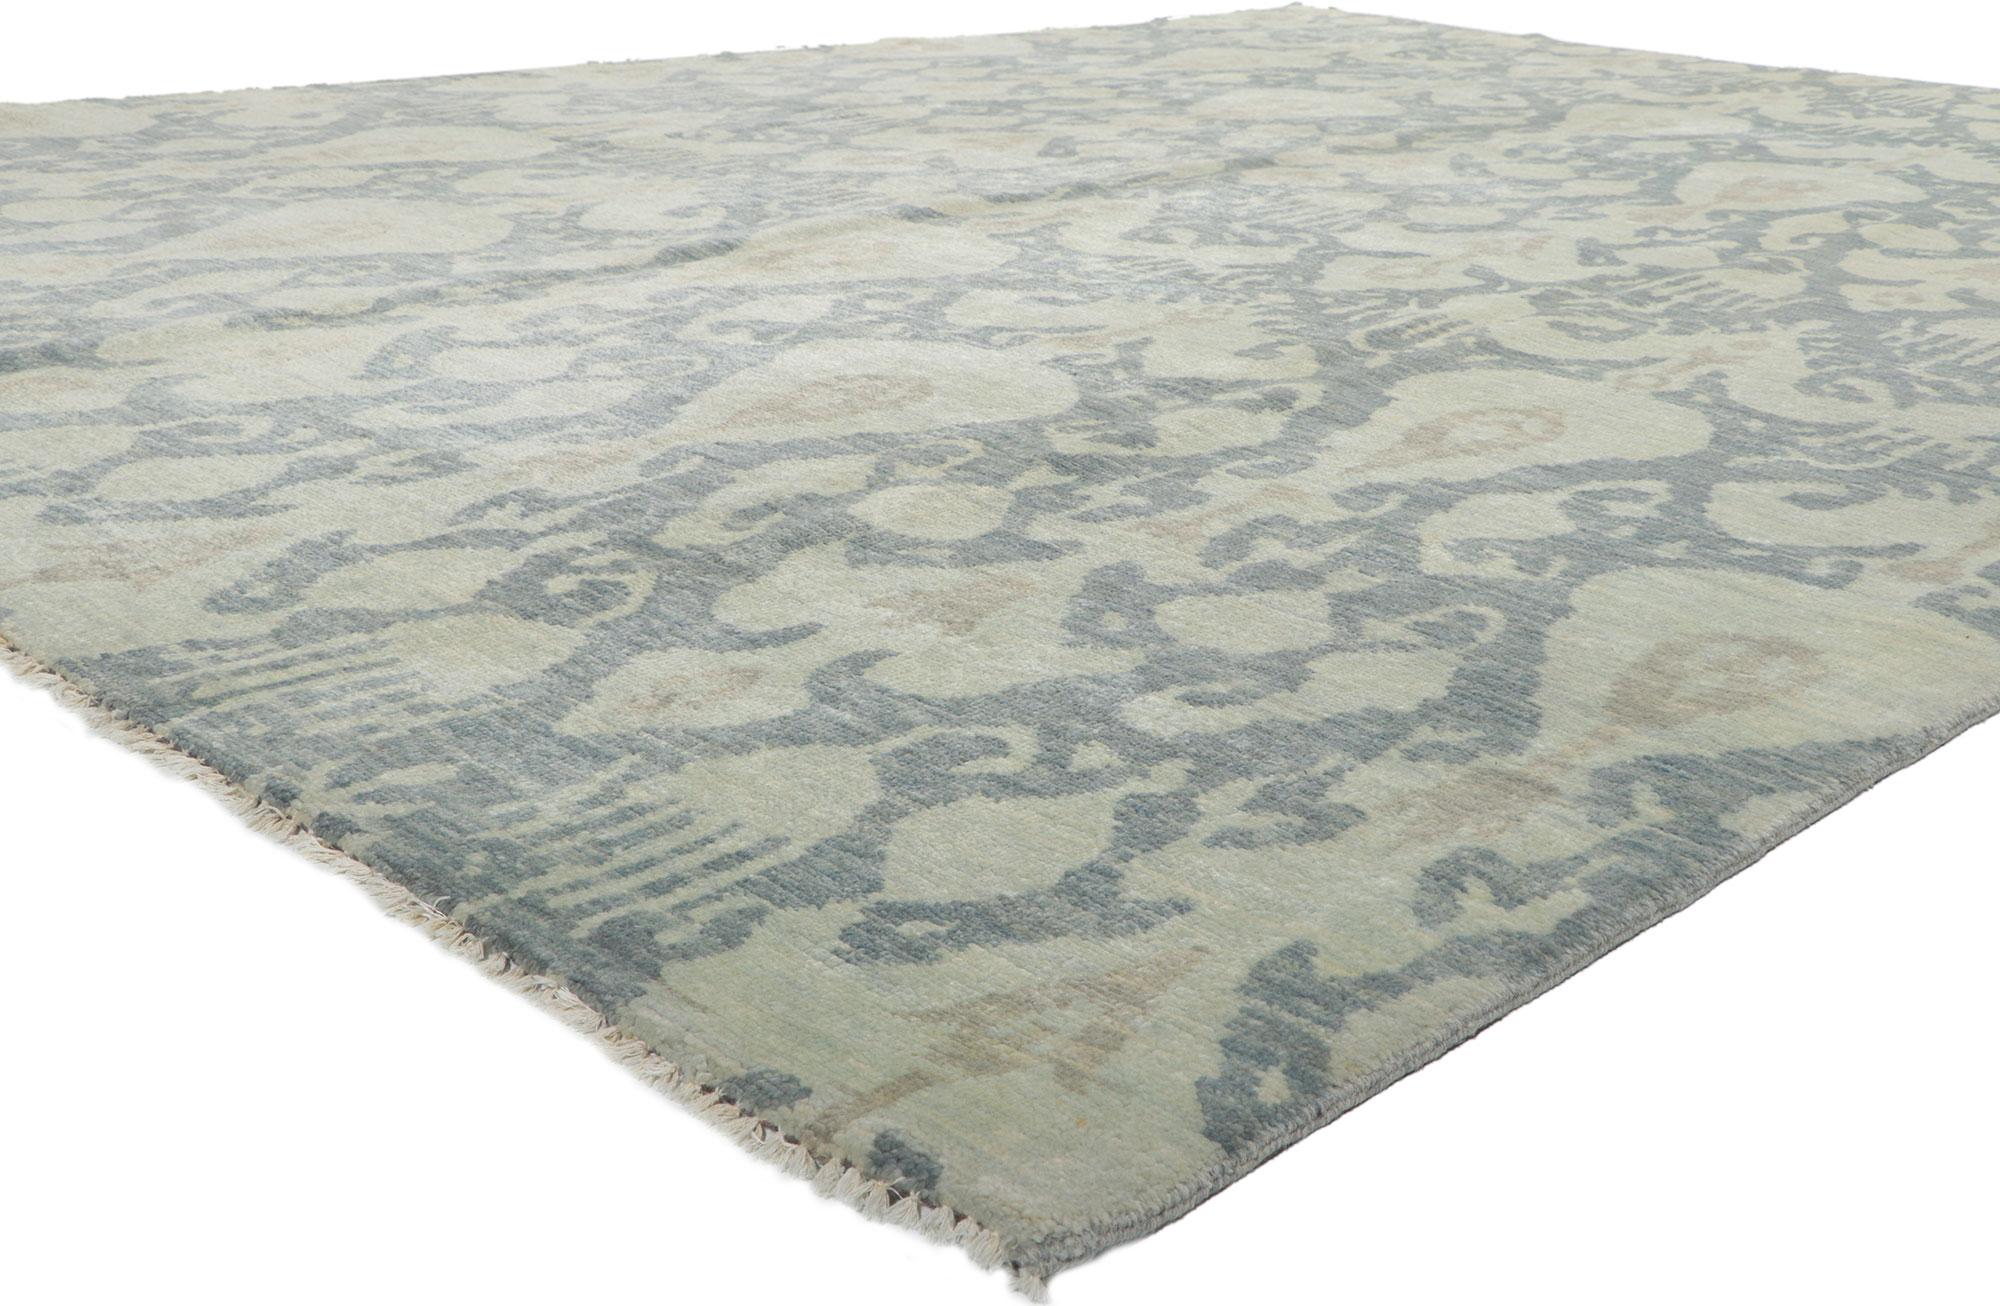 30255 New Transitional Ikat Rug, 10.00 X 13.08.
With its incredible detail and texture, this hand knotted wool Ikat rug from India is a captivating vision of woven beauty. The eye-catching ikat design and colorway woven into this piece work